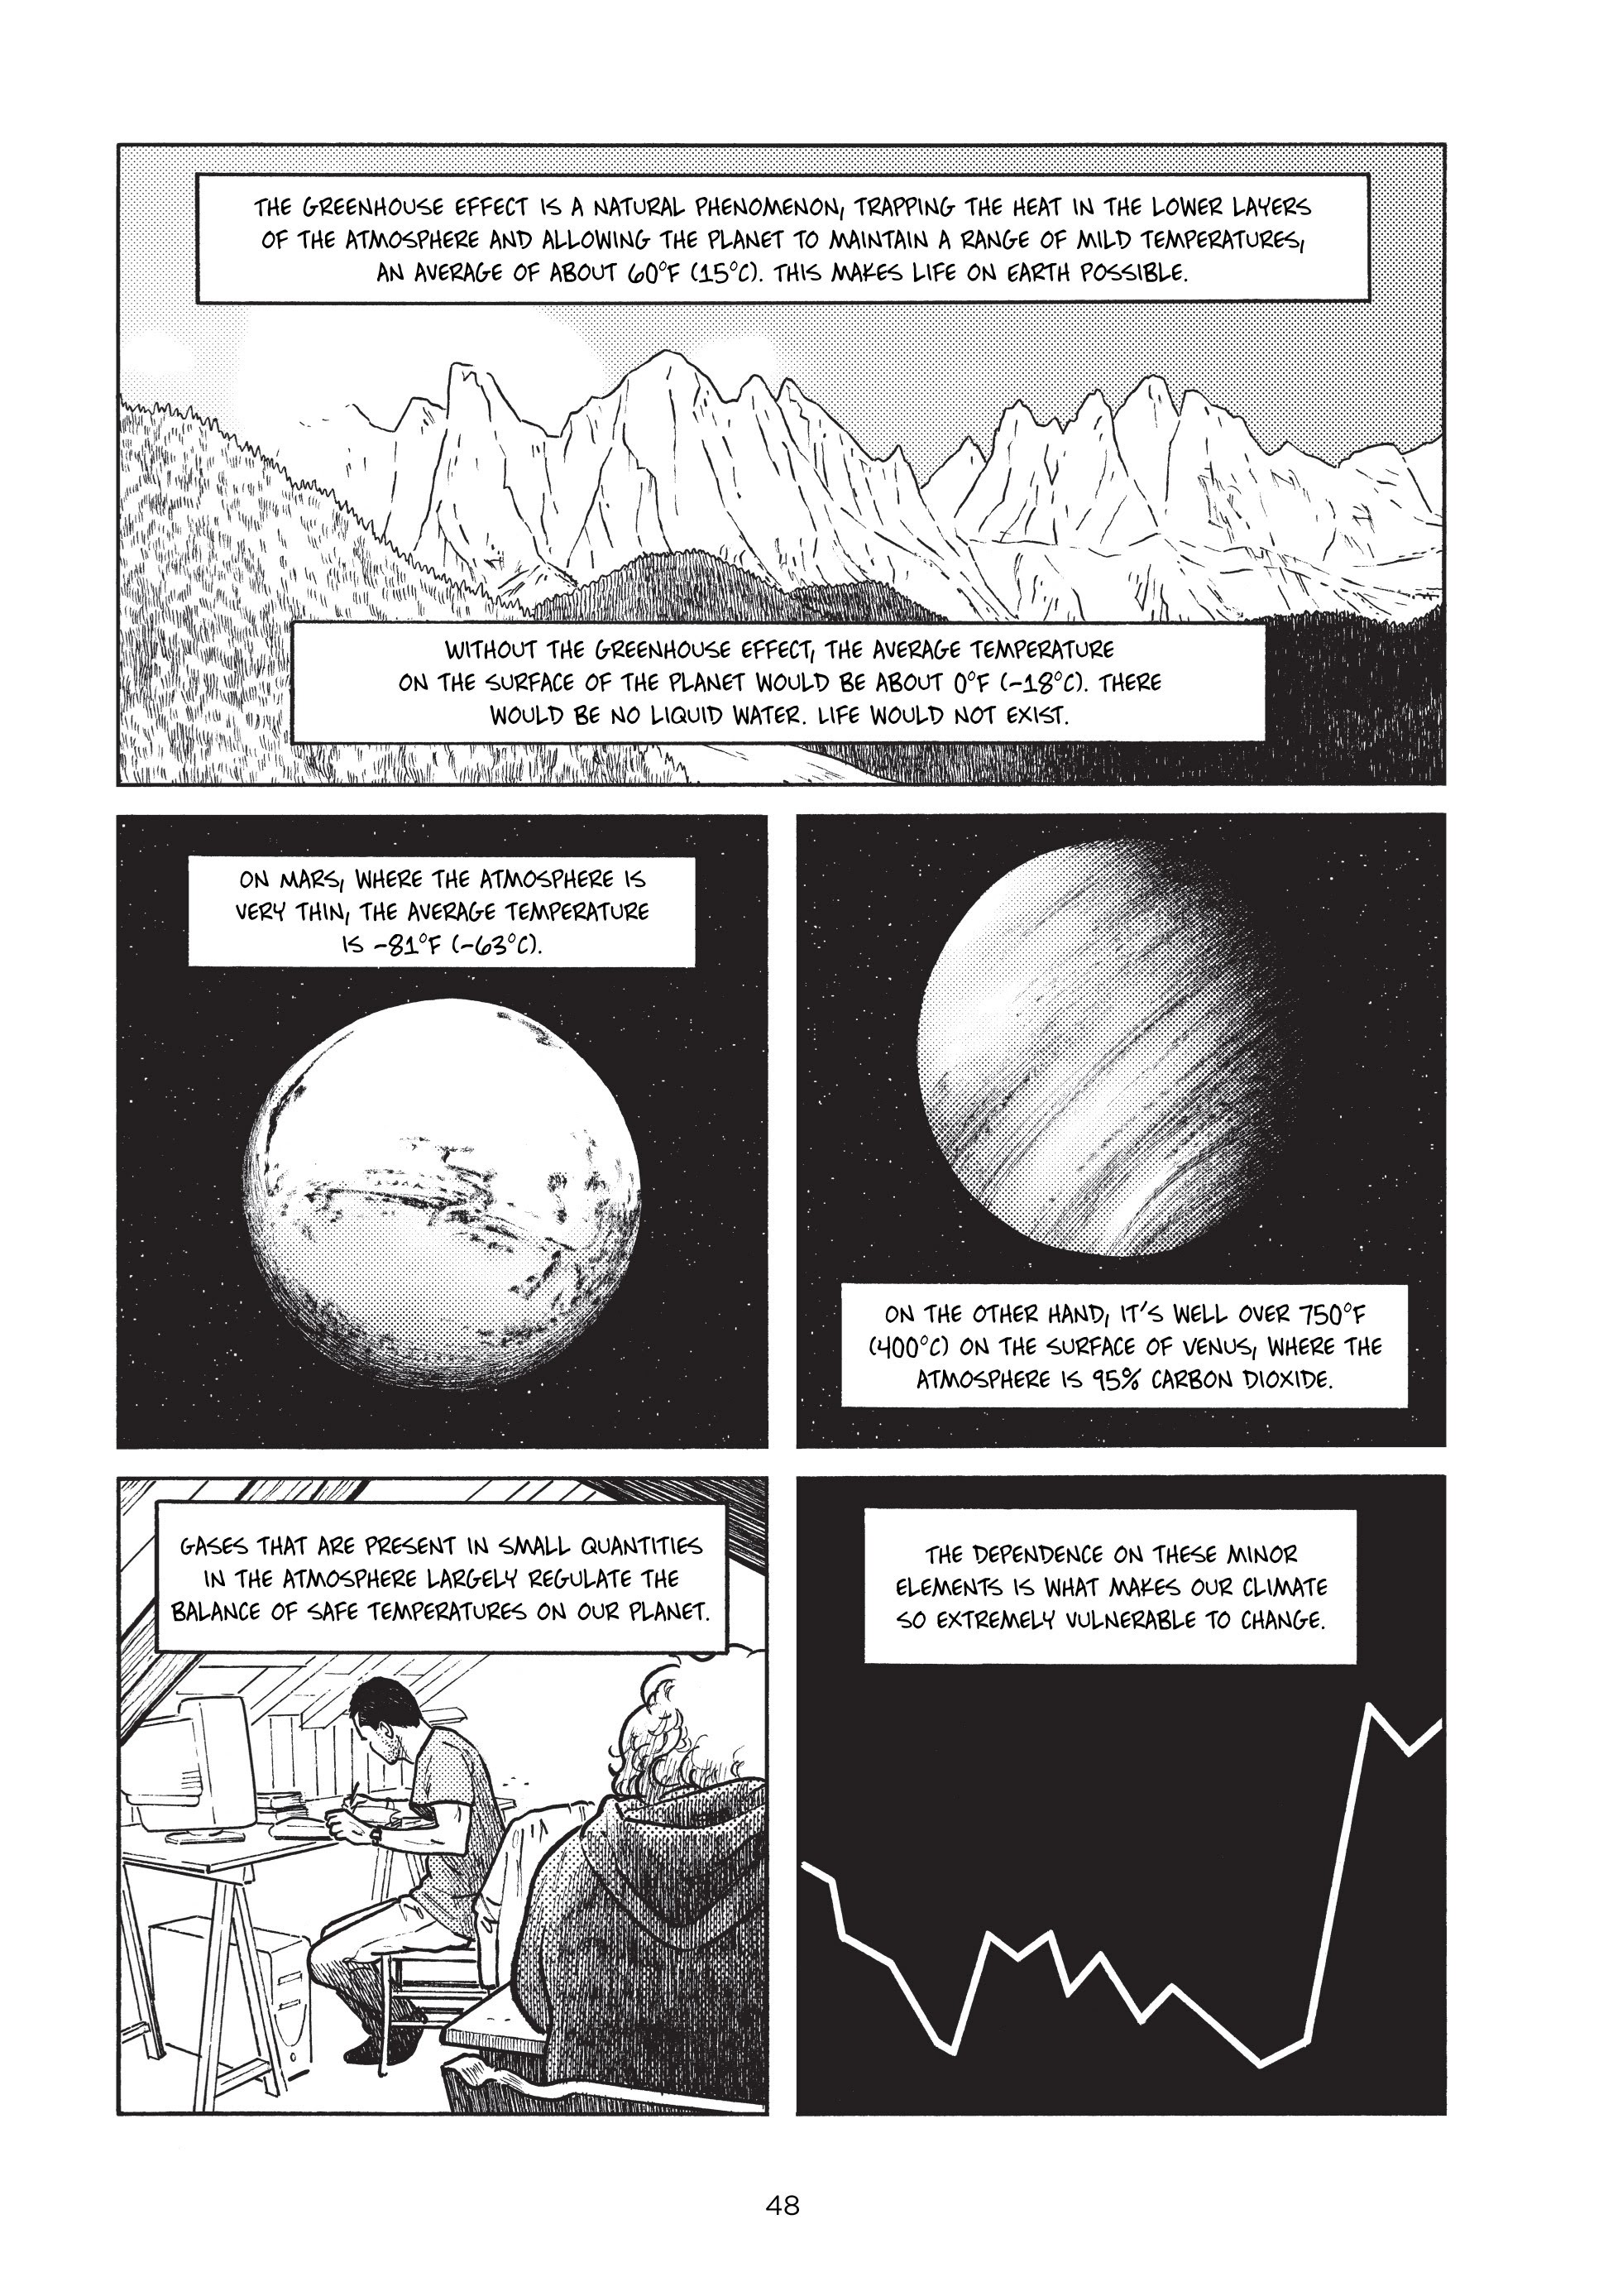 Read online Climate Changed: A Personal Journey Through the Science comic -  Issue # TPB (Part 1) - 45